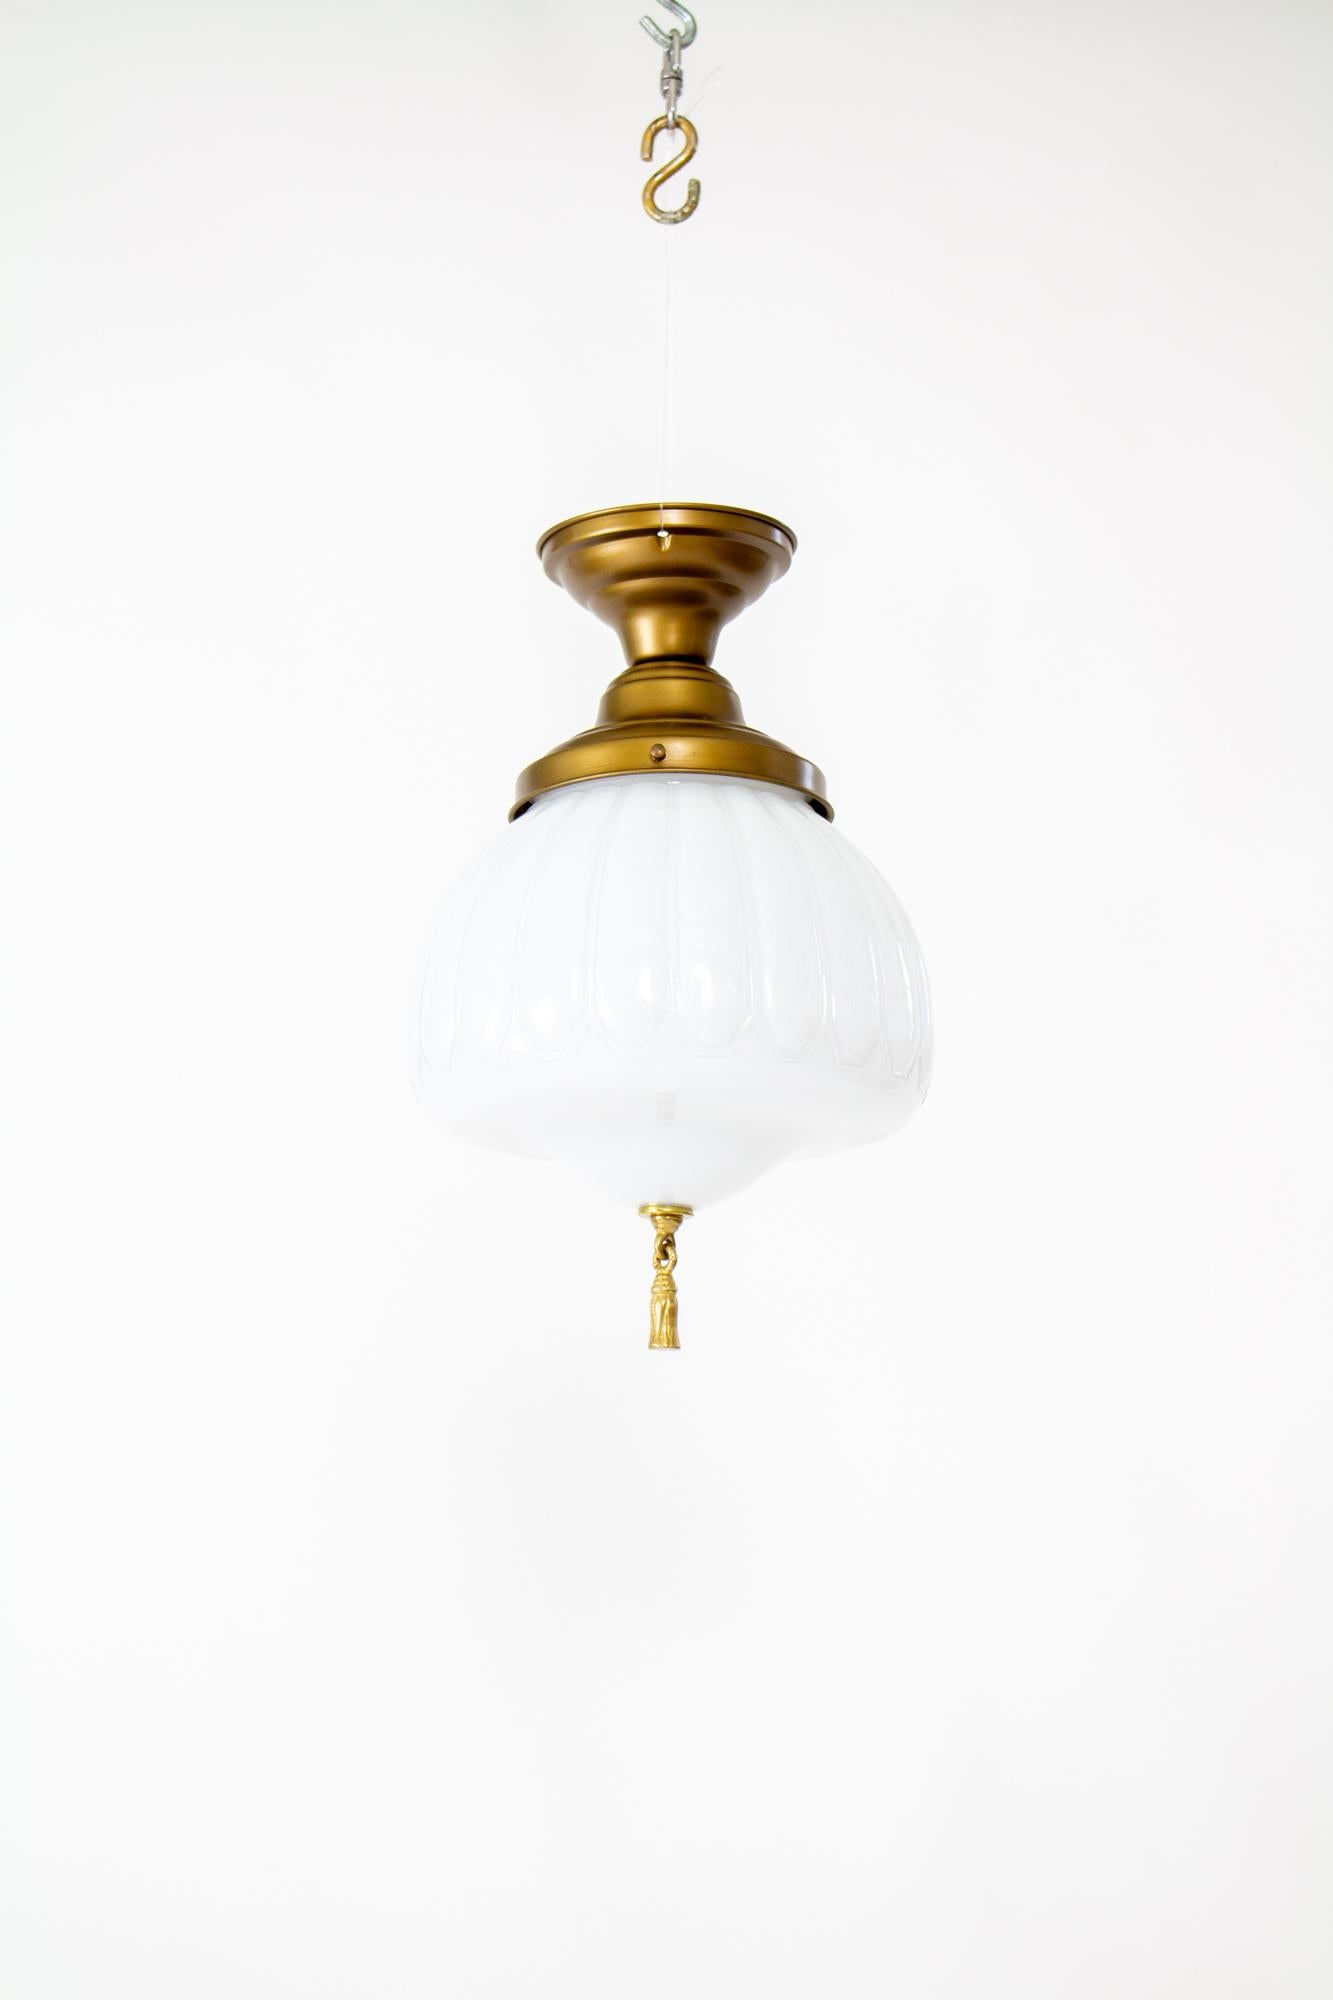 Early 20th Century semi flush white case glass fixture with bronze tassel. Early 20th century glass in a round pillowed shape with a bottom tassel, white case glass. Fixture is new in a bronze finish. Glass in good condition with some light chips